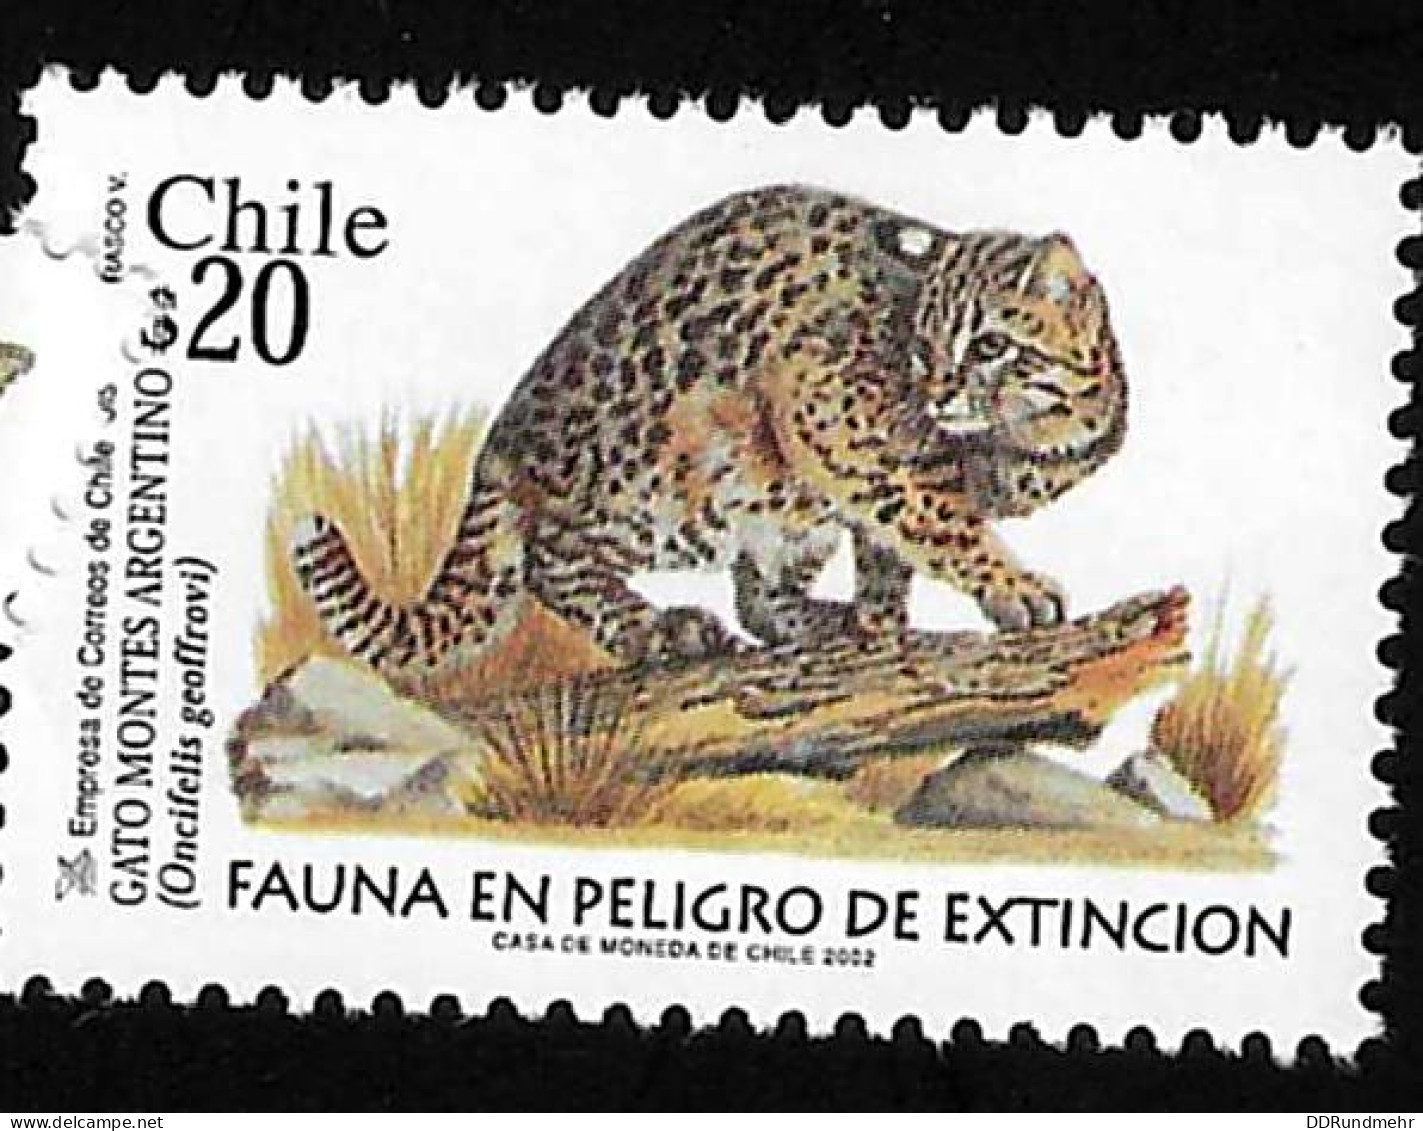 2002 Wild Cats  Michel CL 2069 - 2070 Stamp Number CL 1394 - 1395 Yvert Et Tellier CL 1636 - 1637 Xx MNH - Chili